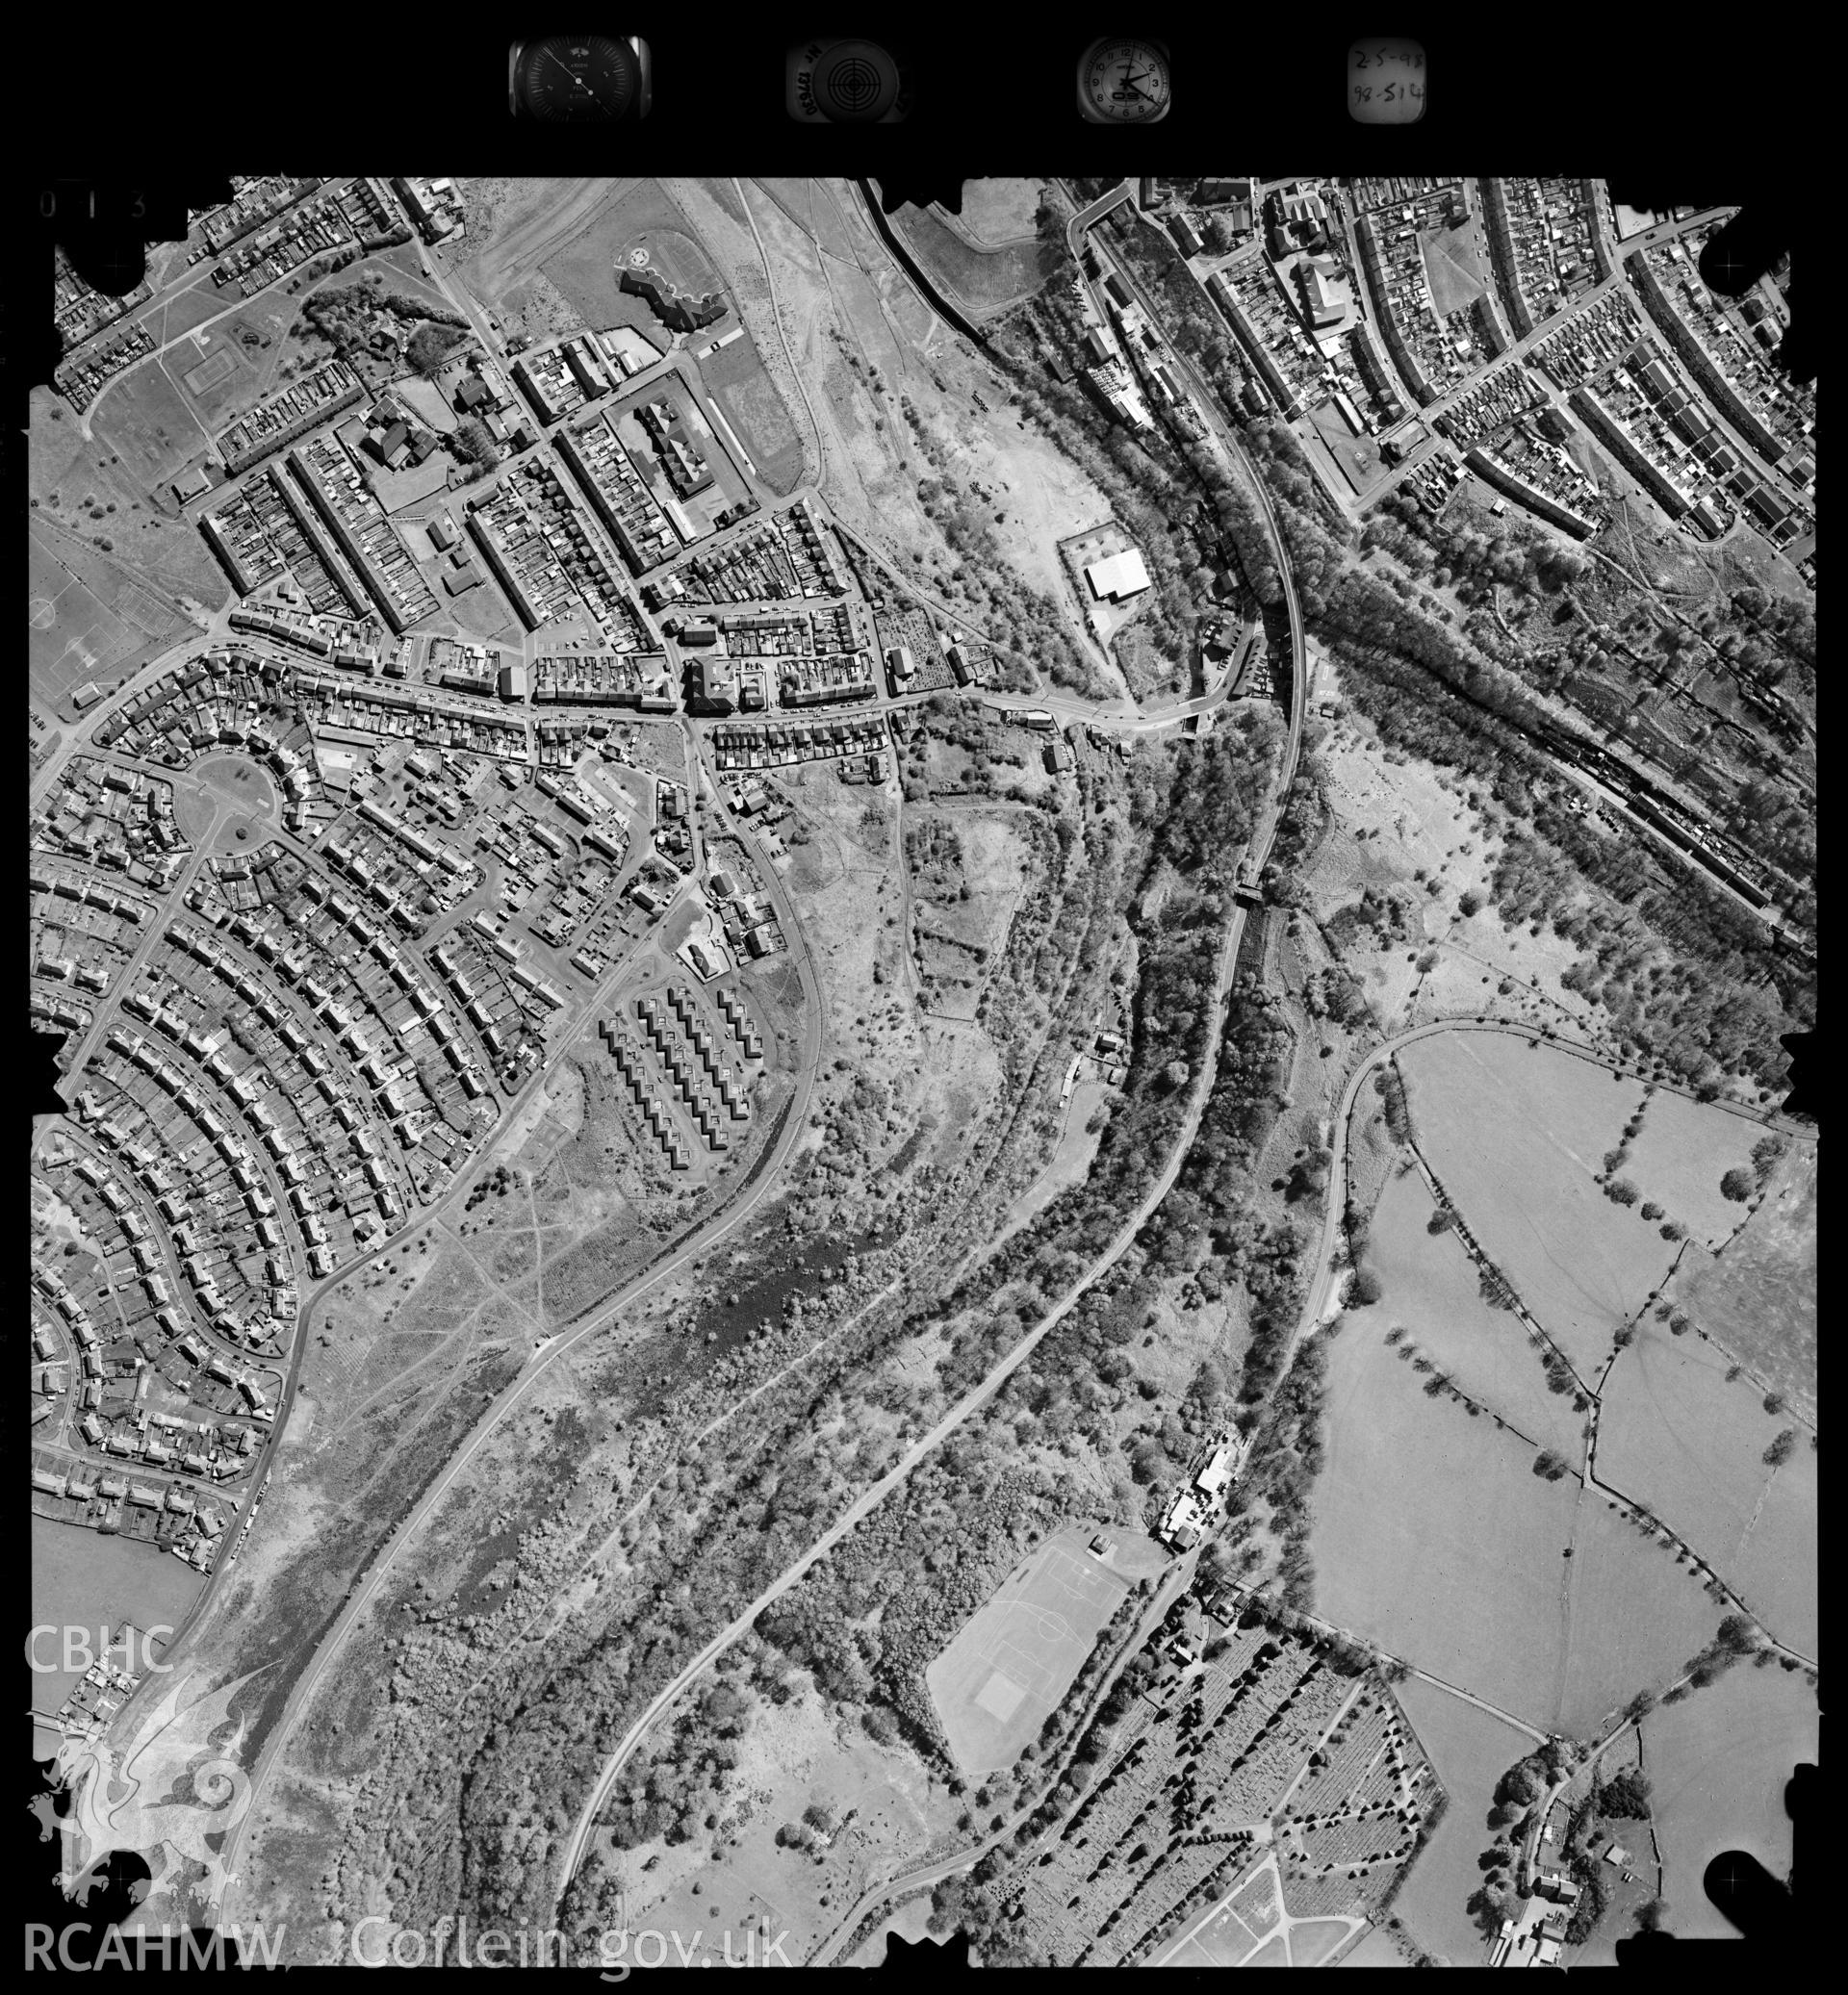 Digitized copy of an aerial photograph showing Aberbargoed area, taken by Ordnance Survey, 1998.